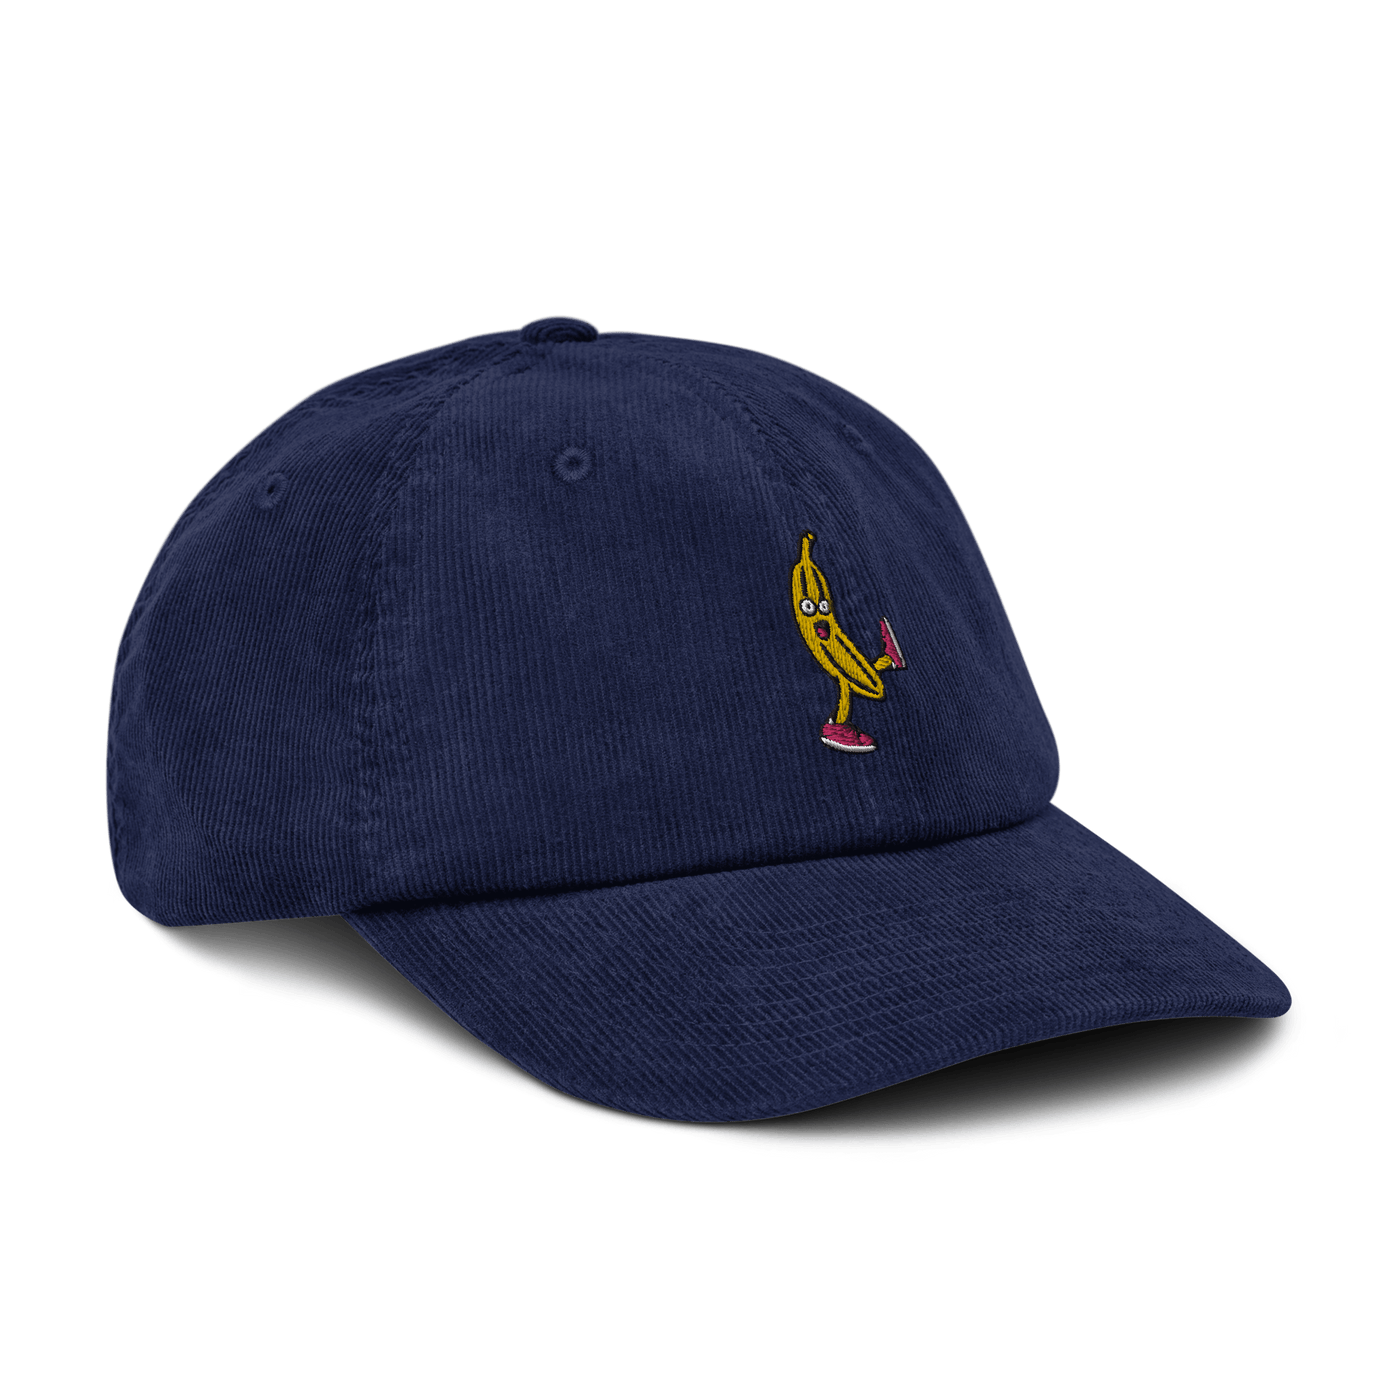 Drunk Banana Corduroy hat - Oxford Navy - - Just Another Cap Store